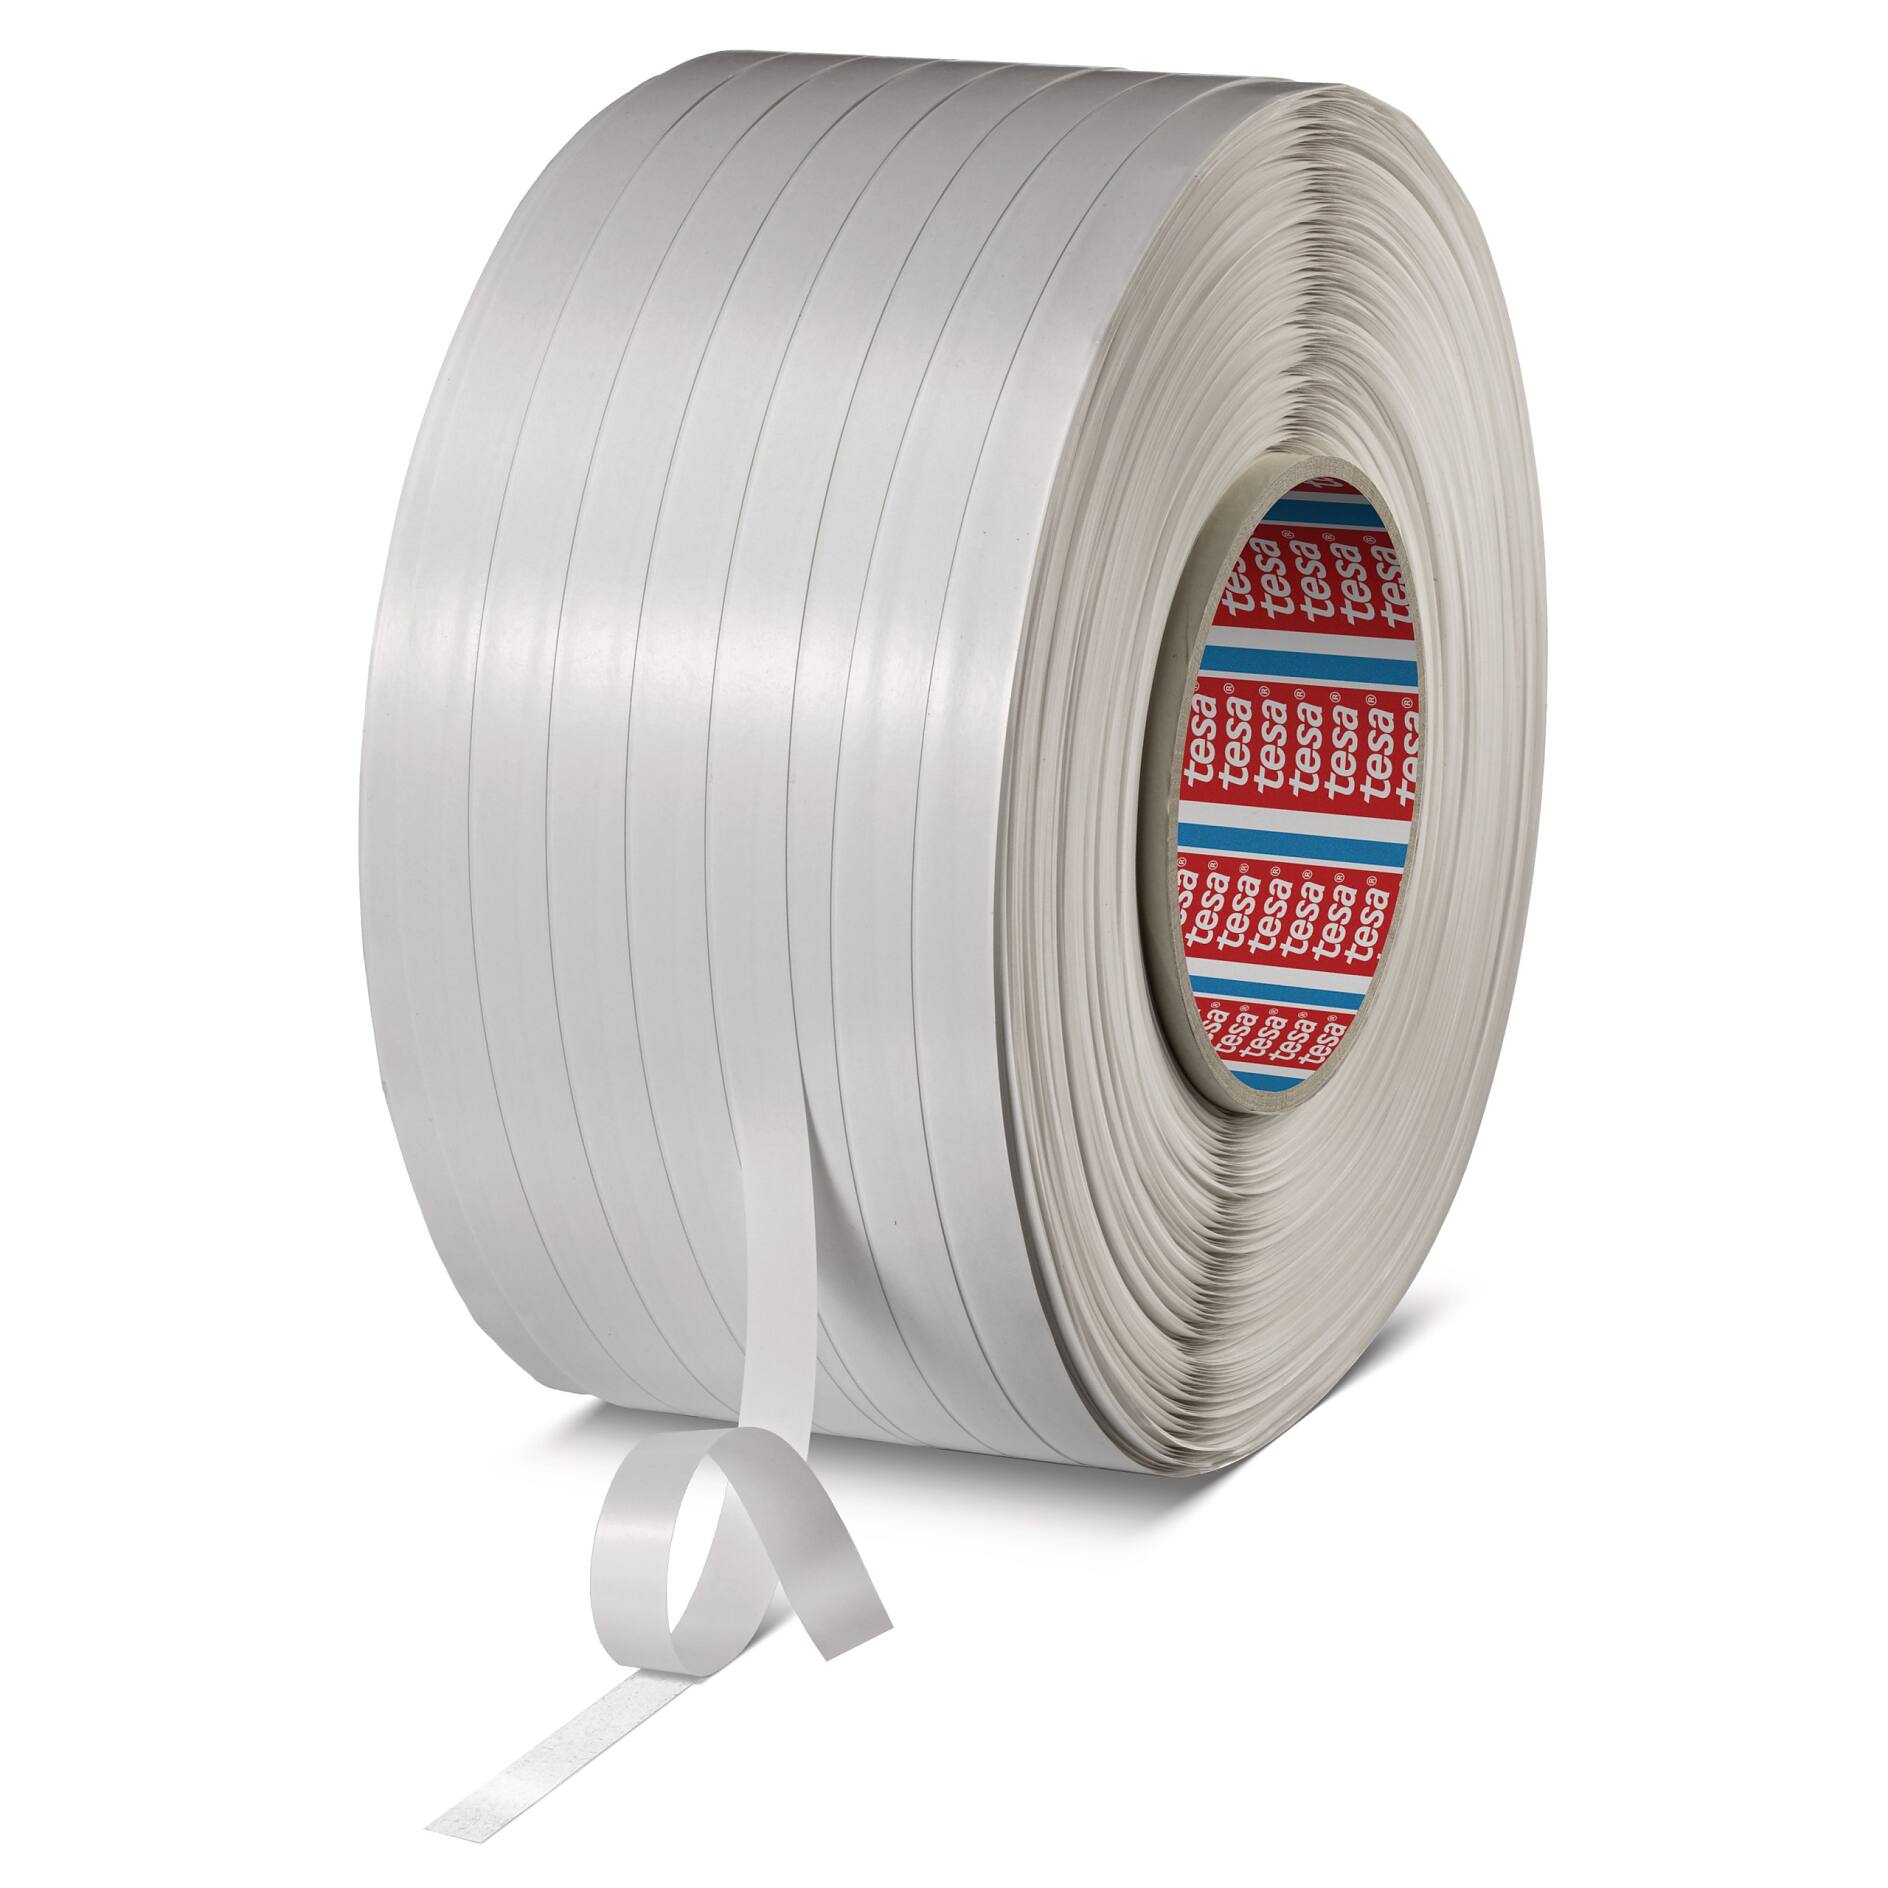 Double Sided Mounting Tape: tesa® 51970: FREE S&H No Min Order‼ –  TapeMonster